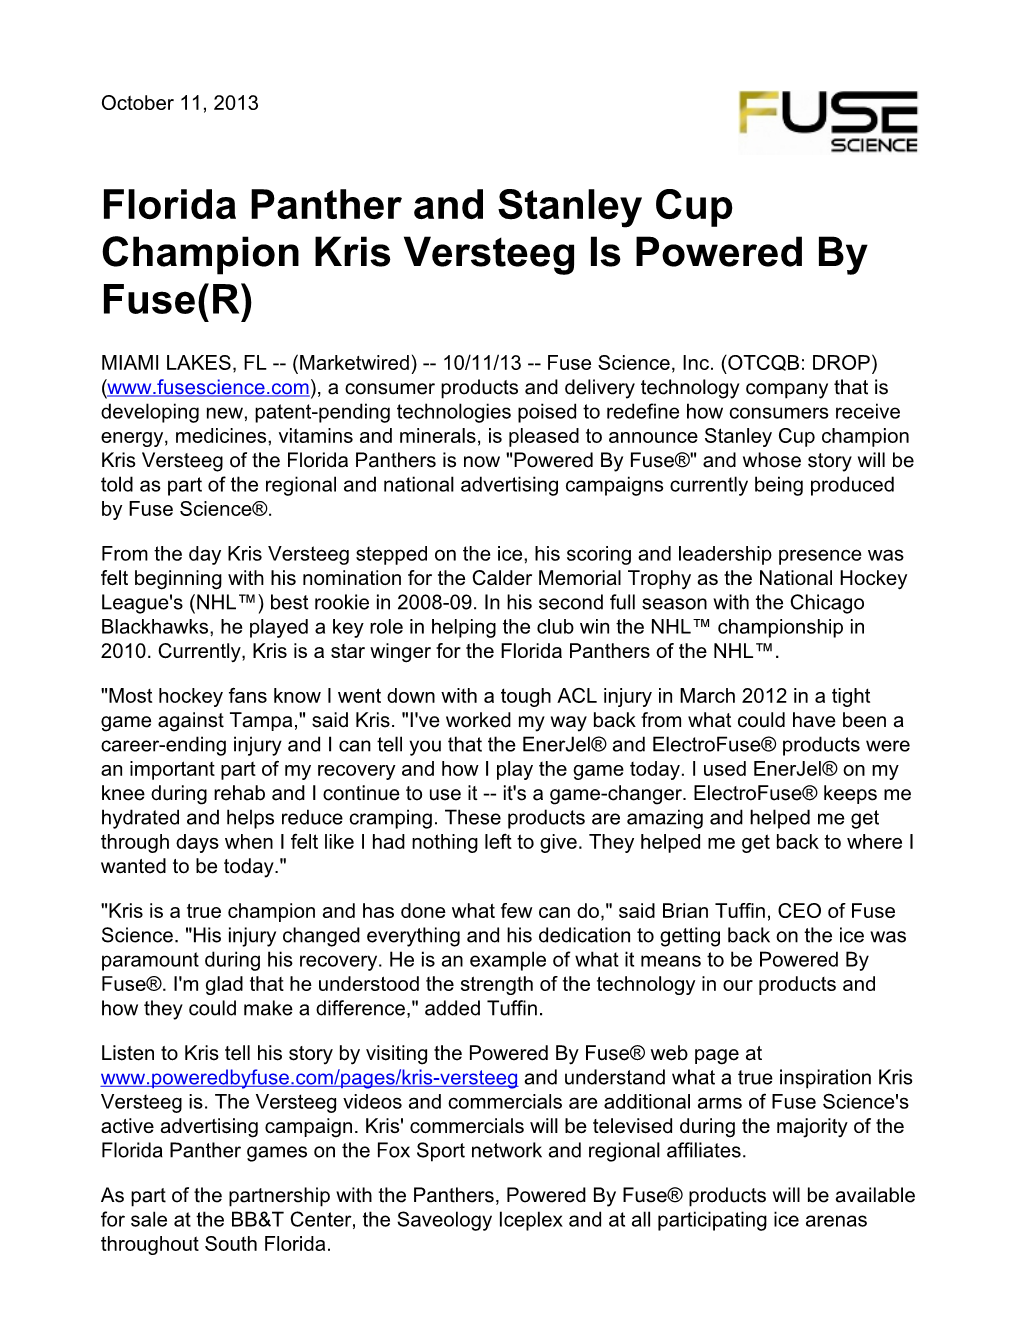 Florida Panther and Stanley Cup Champion Kris Versteeg Is Powered by Fuse(R)